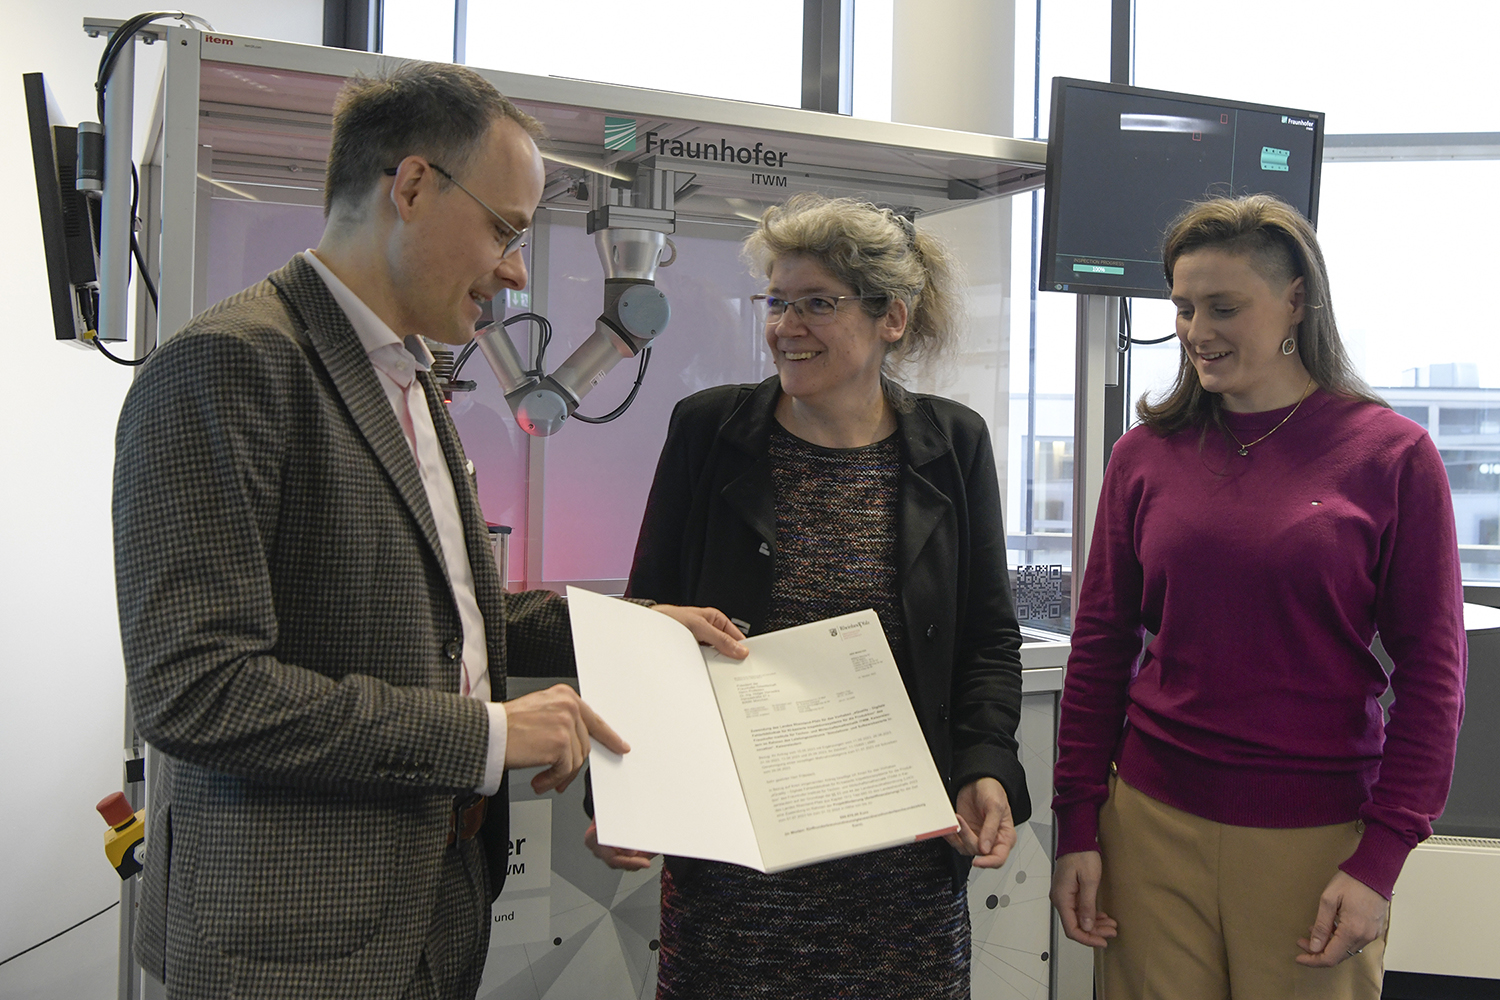 State Secretary Dr. Denis Alt, ITWM Director Prof. Dr. Anita Schöbel and Project Manager Dr. Petra Gospodnetic (from left to right)